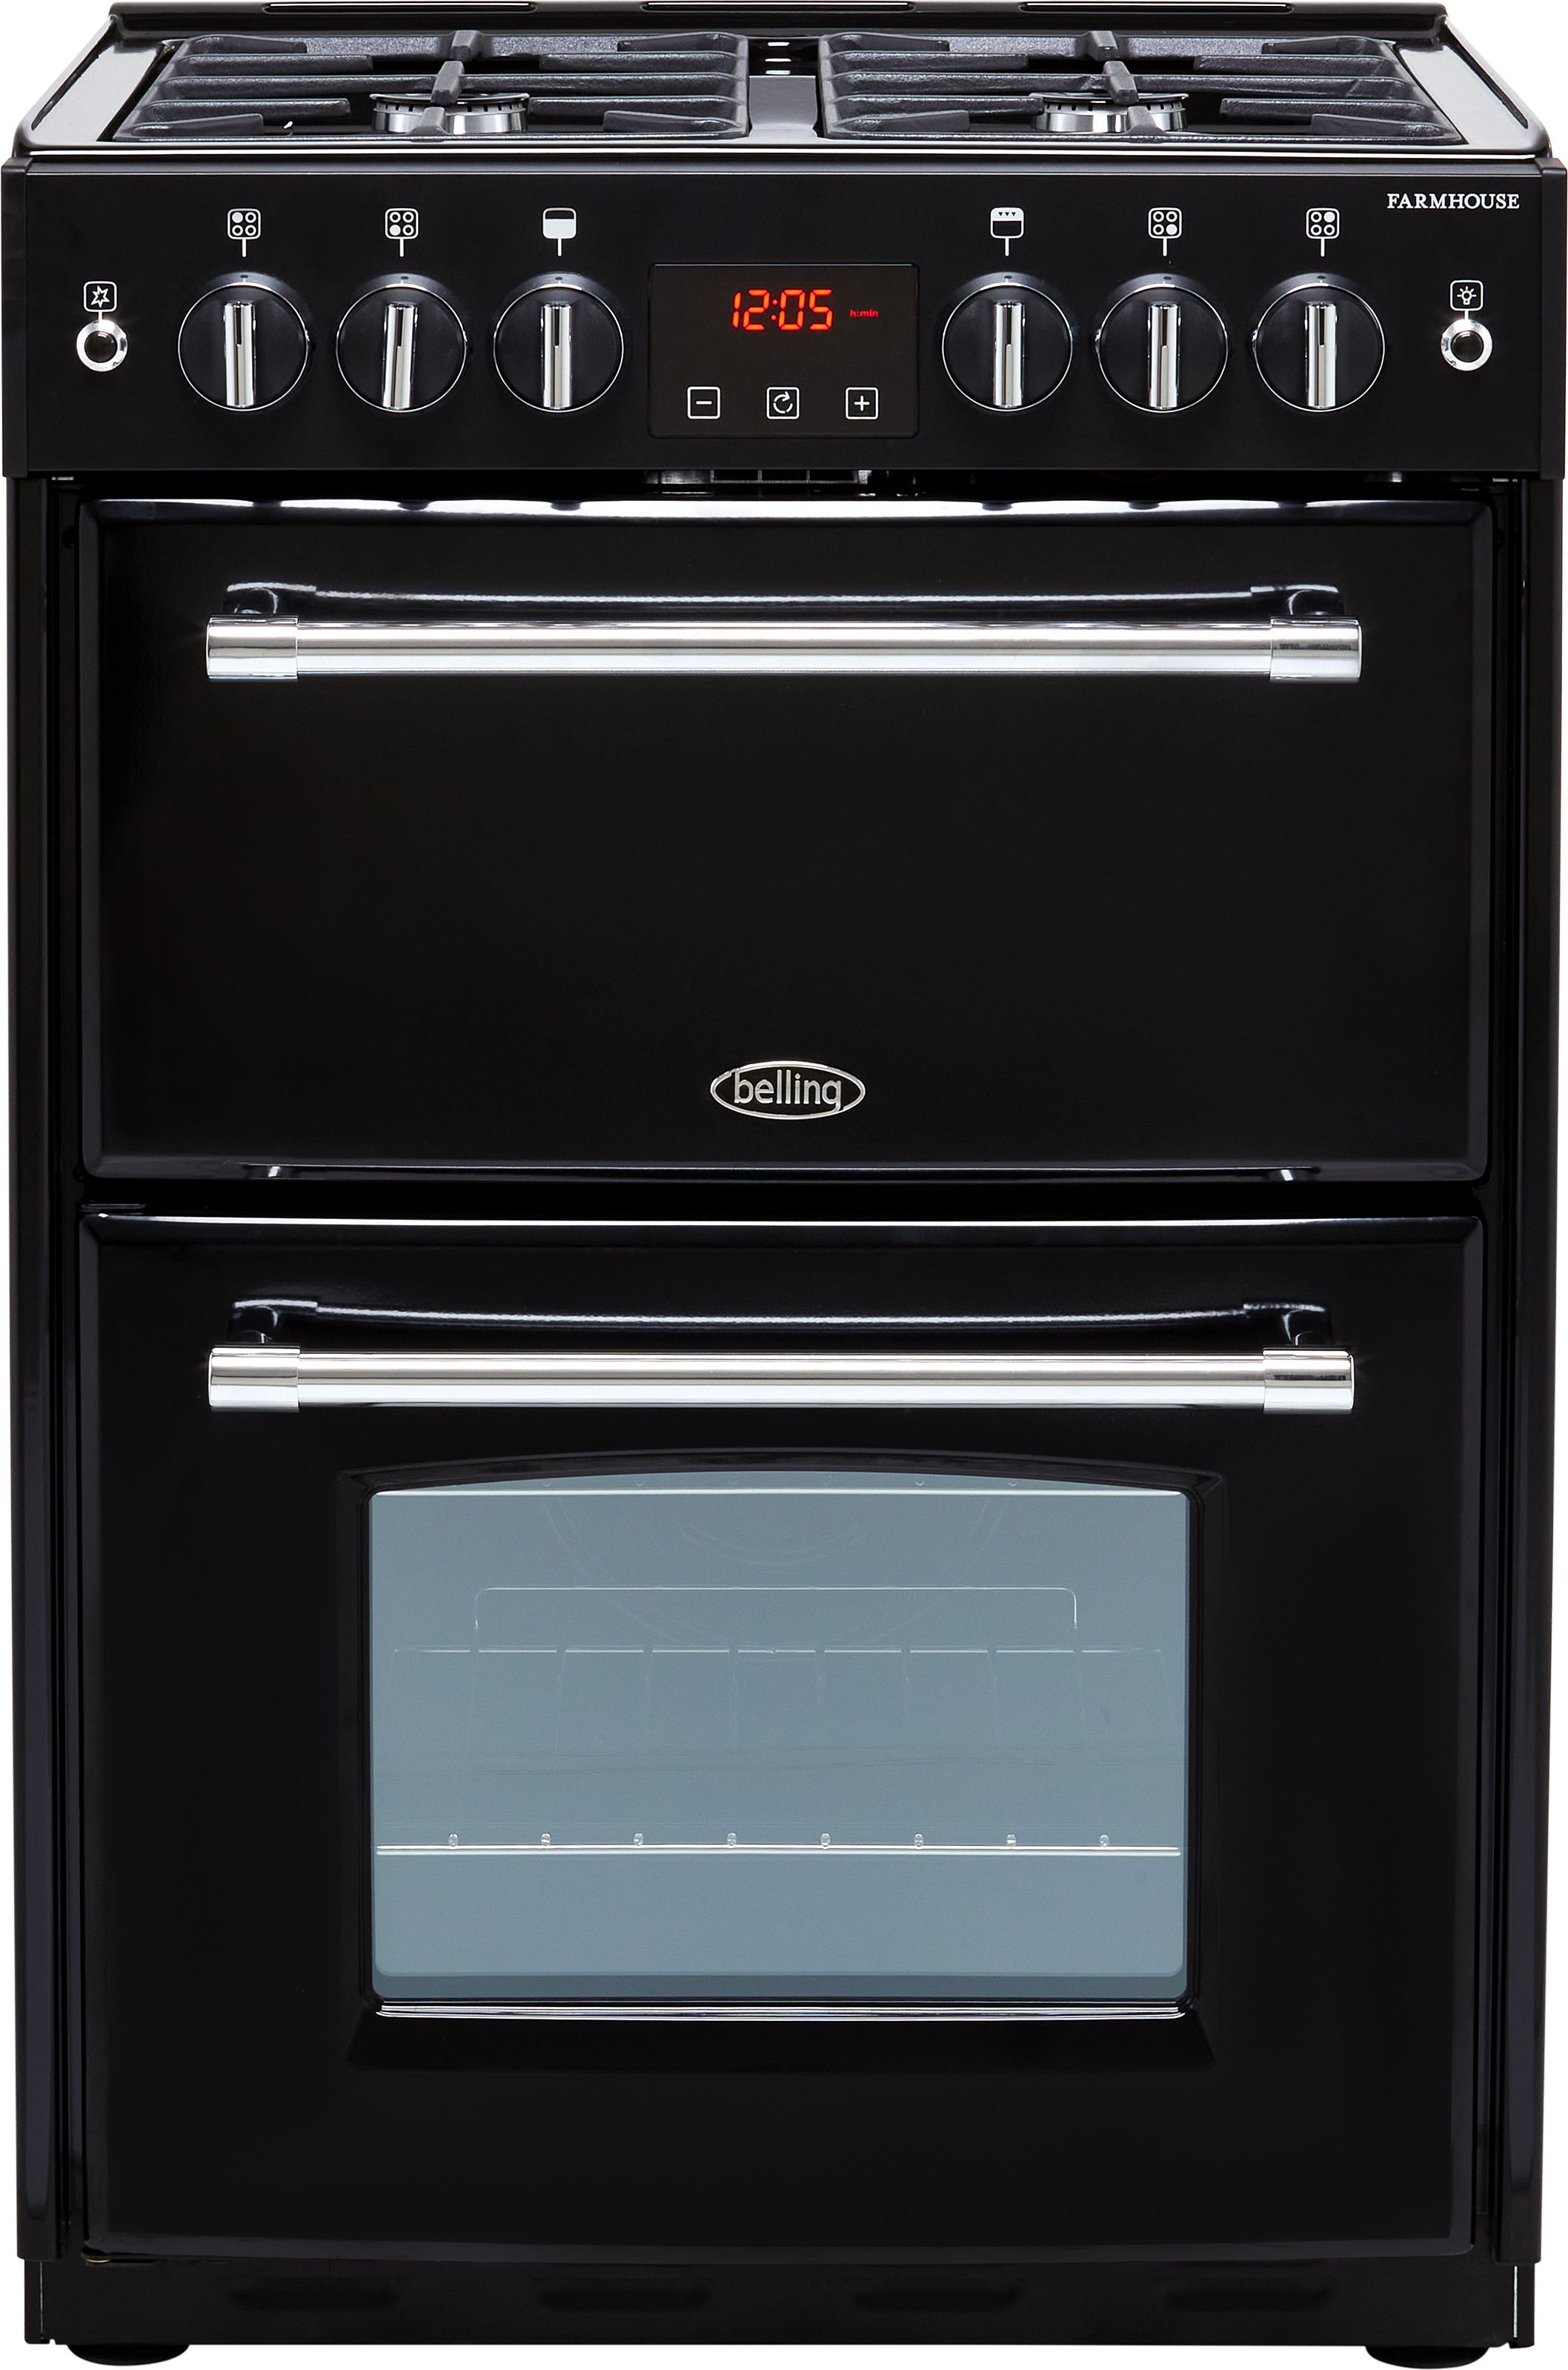 Belling Farmhouse60G 60cm Freestanding Gas Cooker with Full Width Electric Grill - Black - A+/A Rated, Black